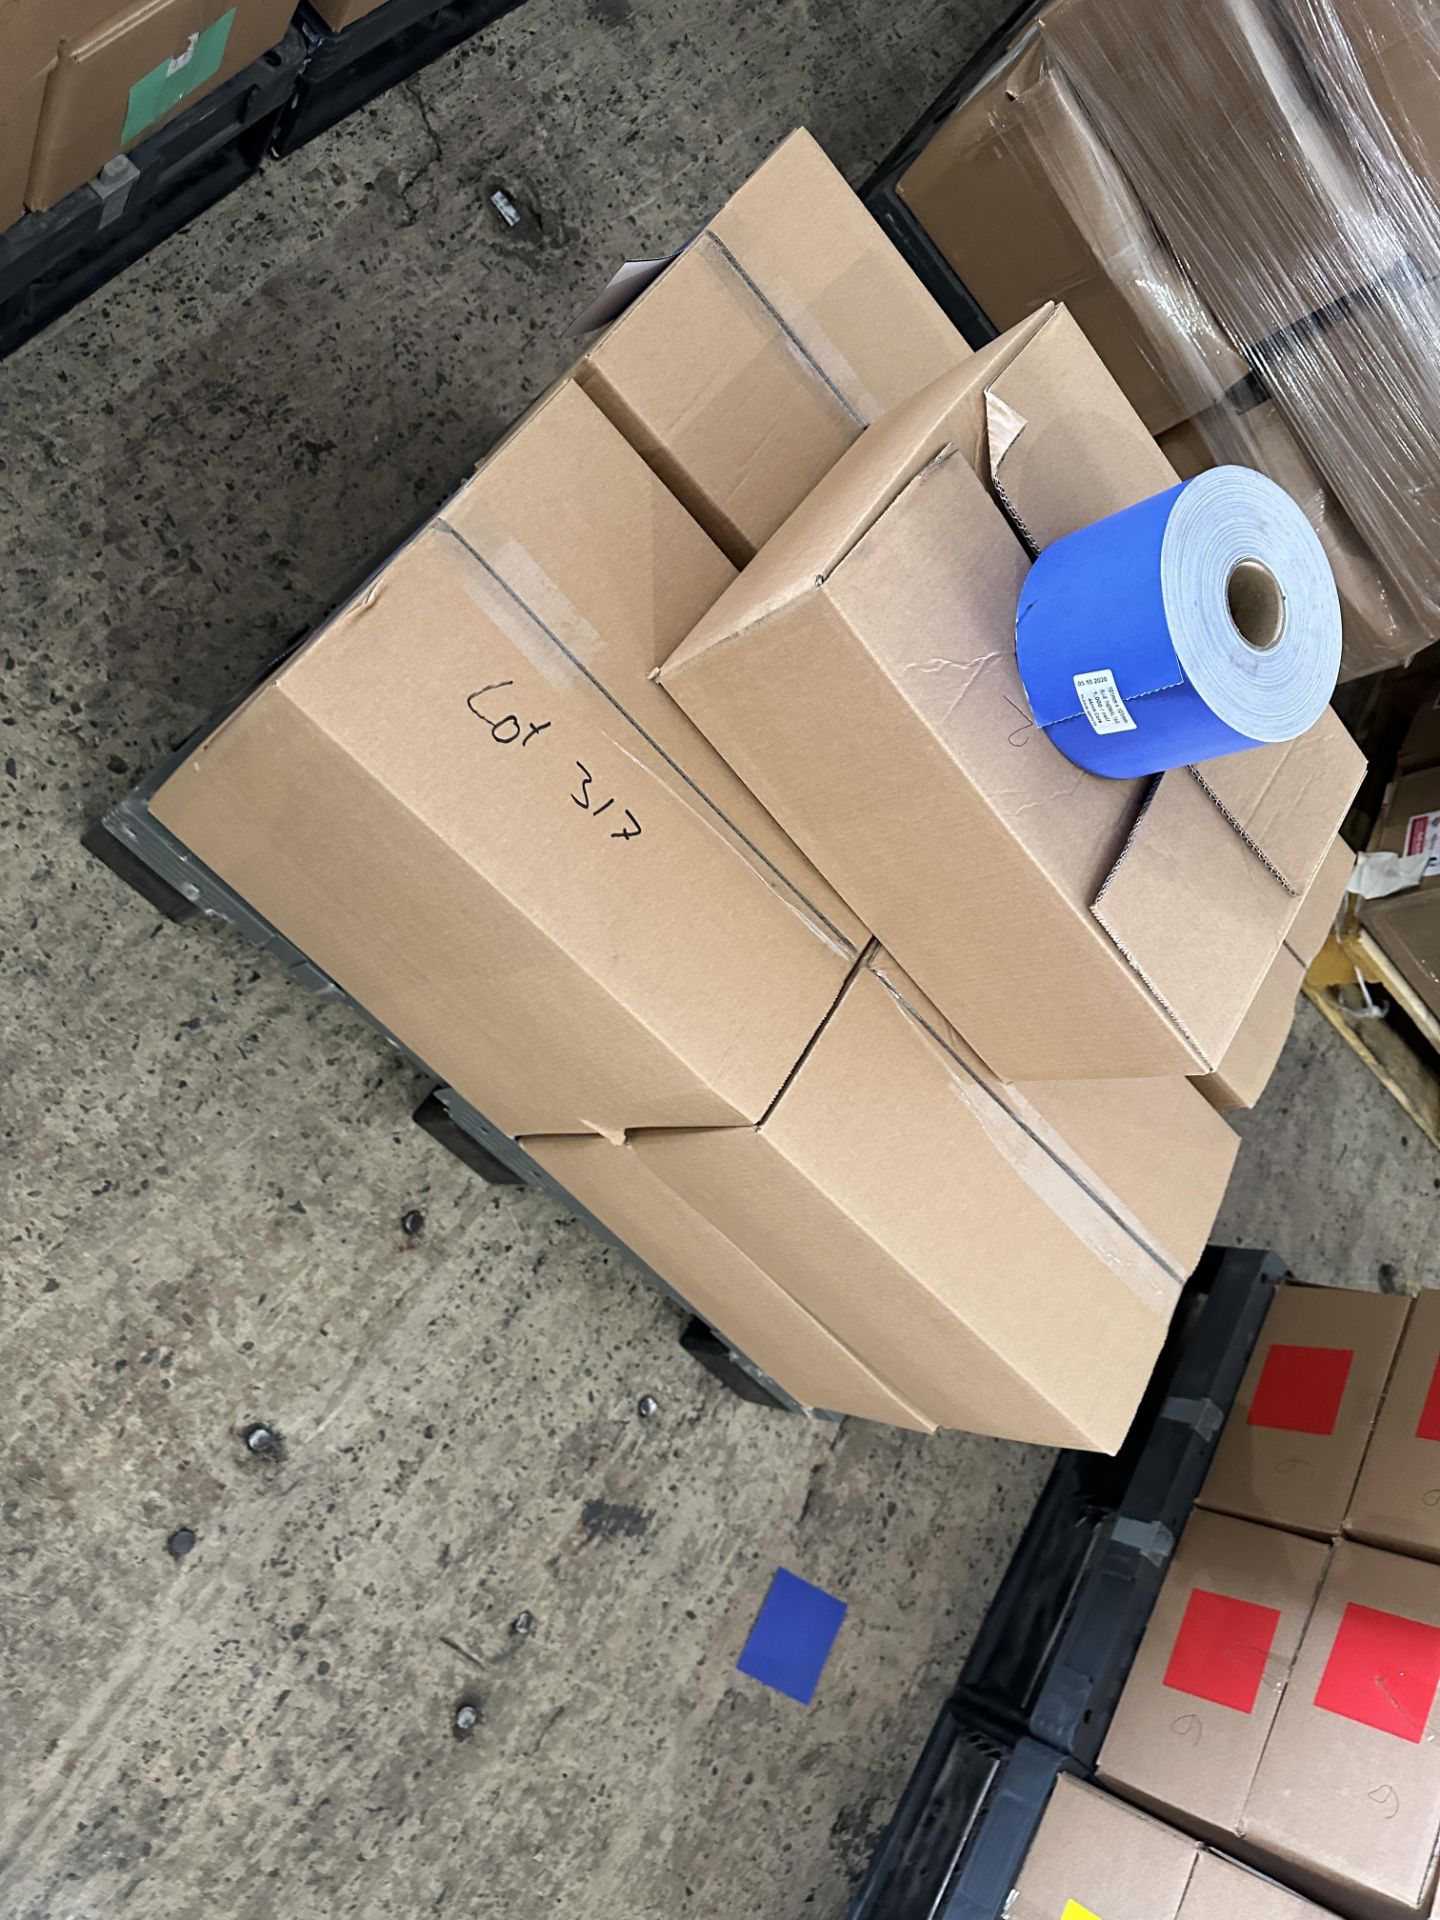 9 X BOXES BLUE TAGS.